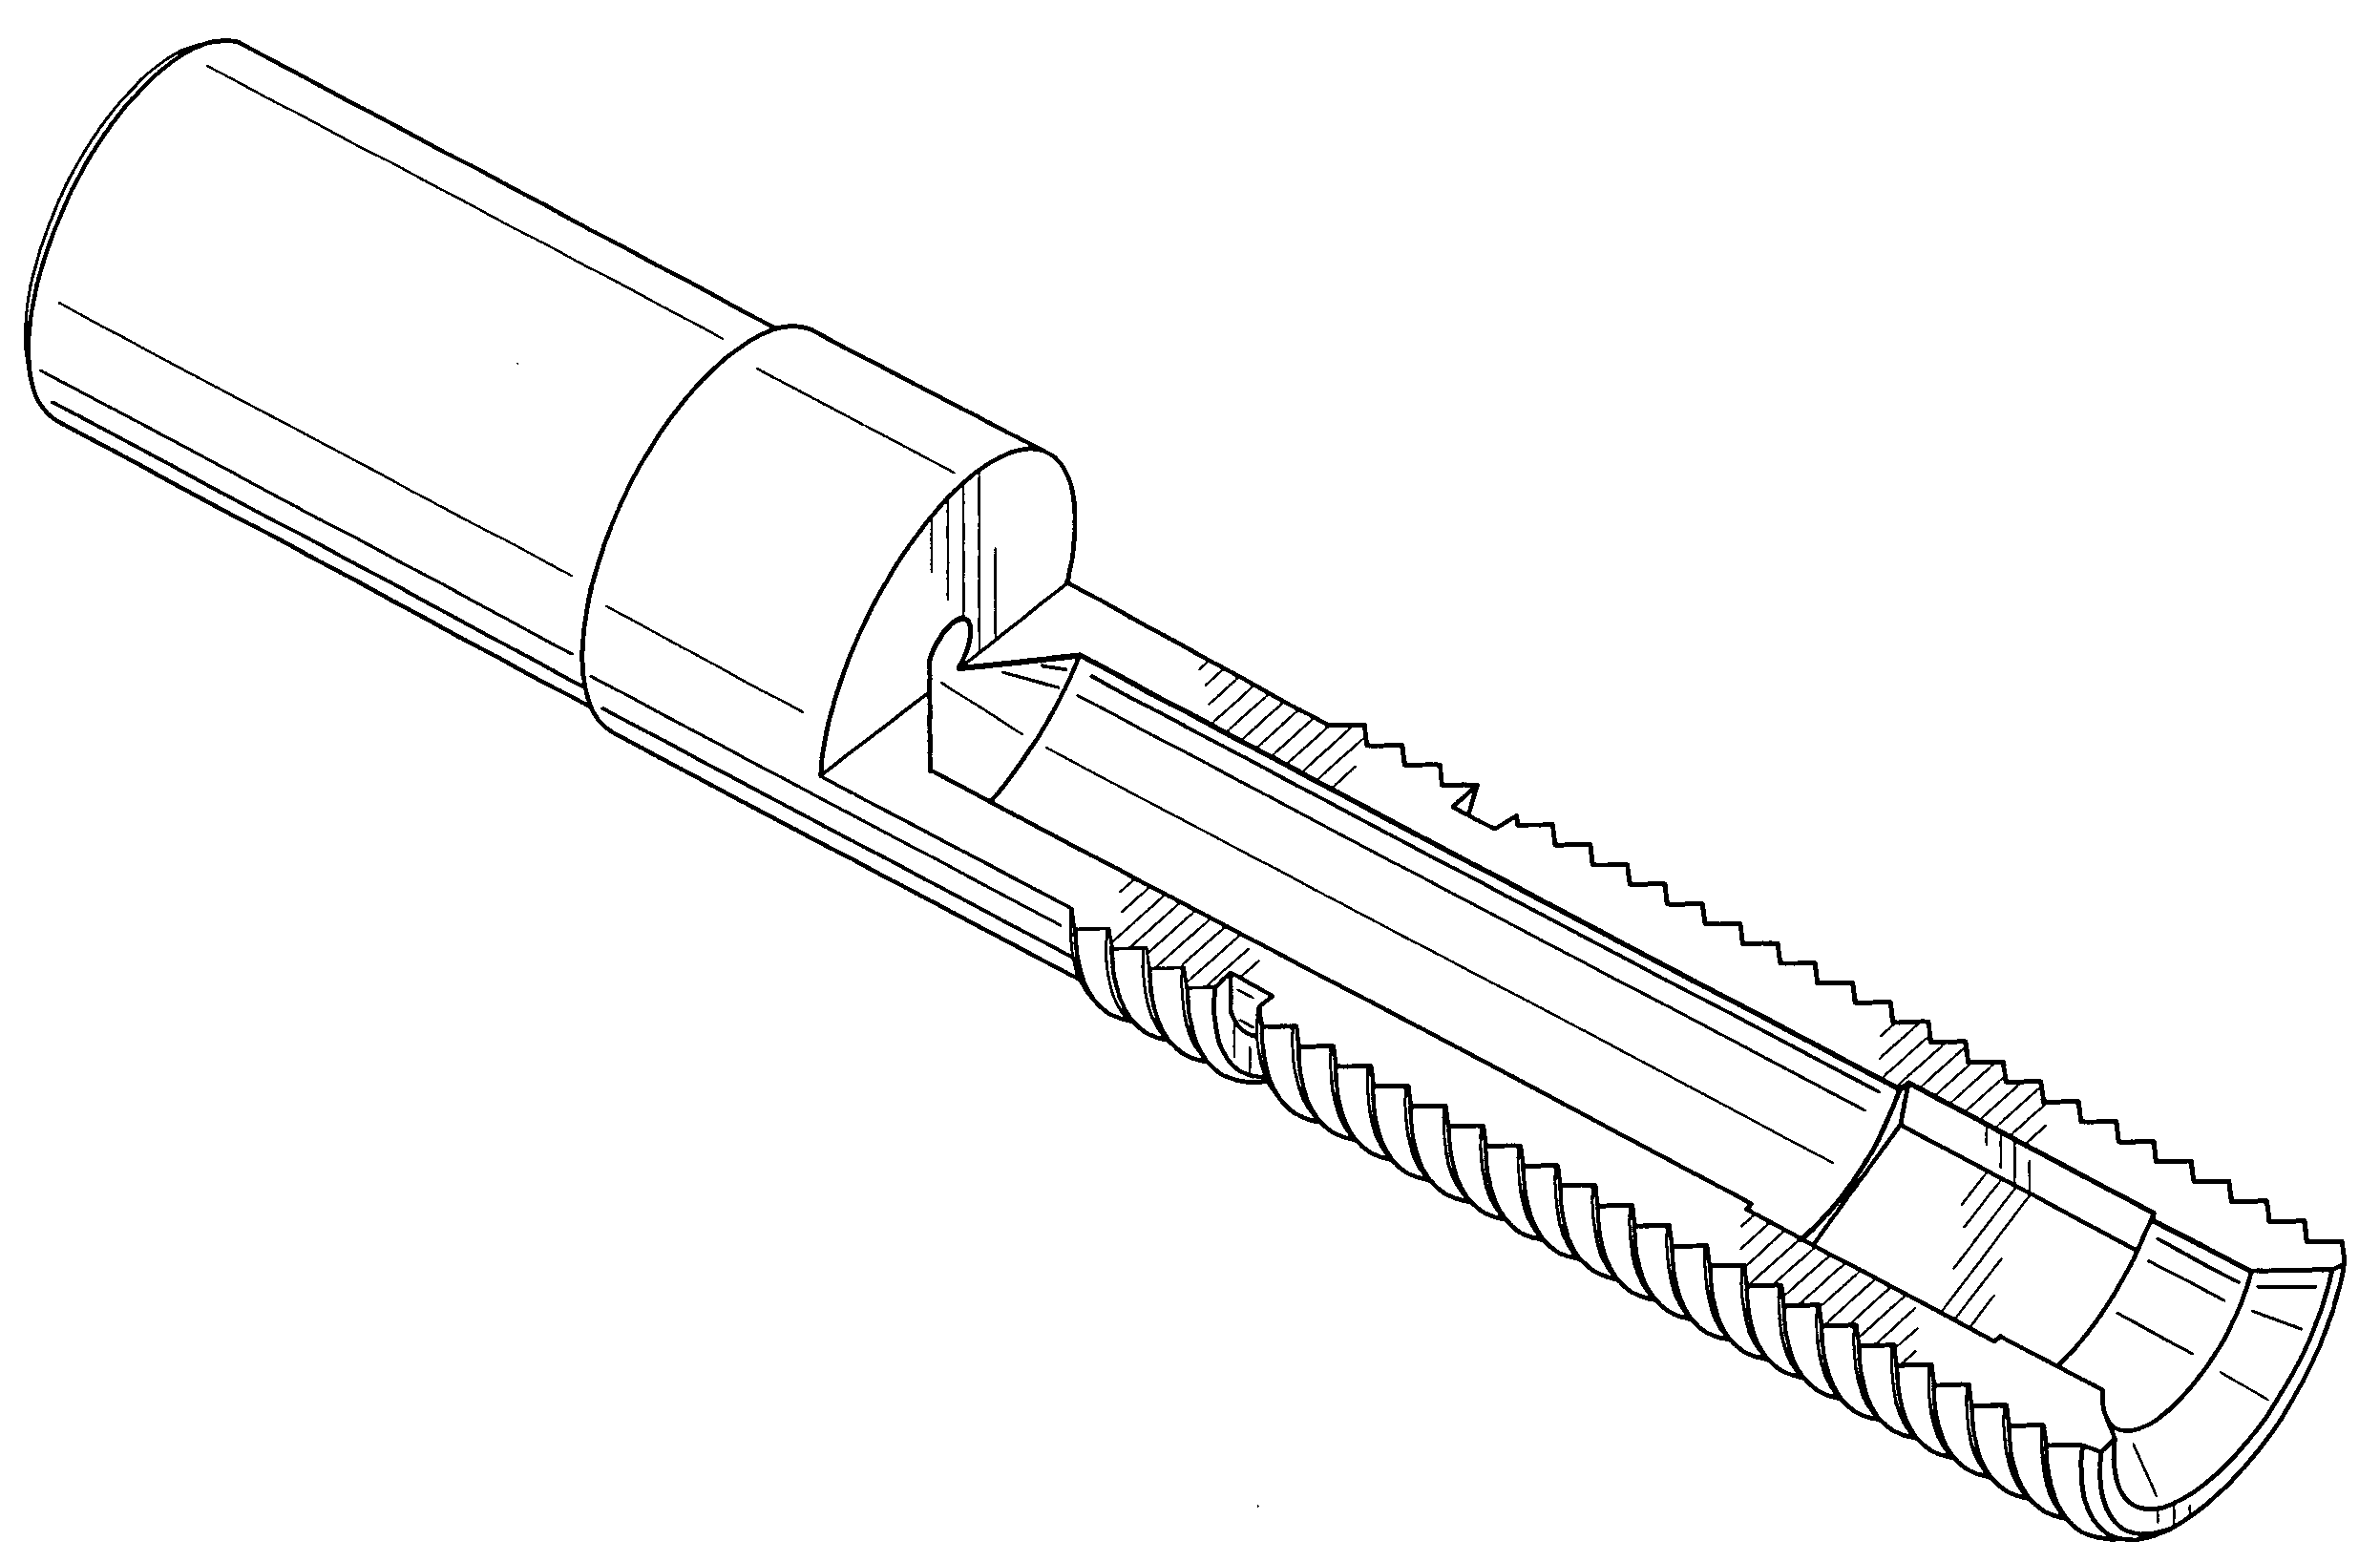 Disengagement and removal tool for swollen glow plug